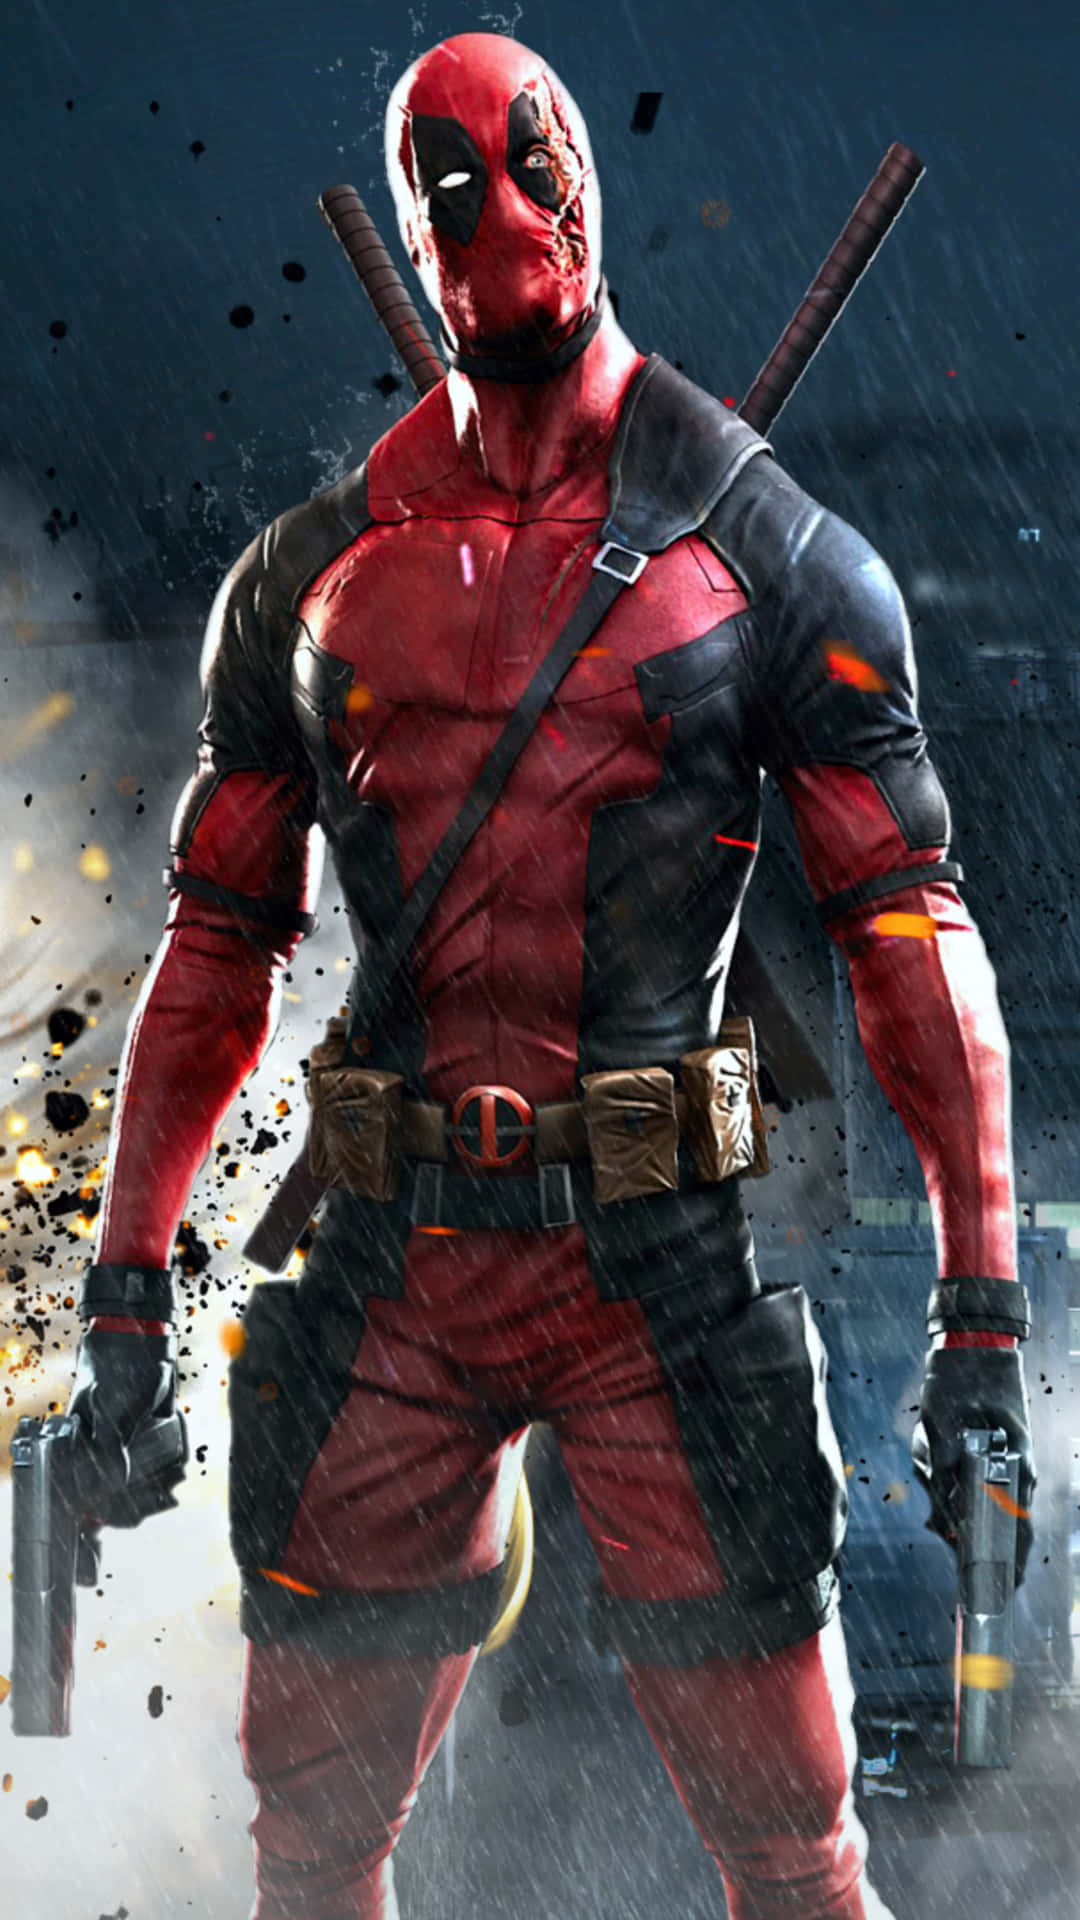 Get your Deadpool swagger on with this cool Deadpool-themed iPhone! Wallpaper